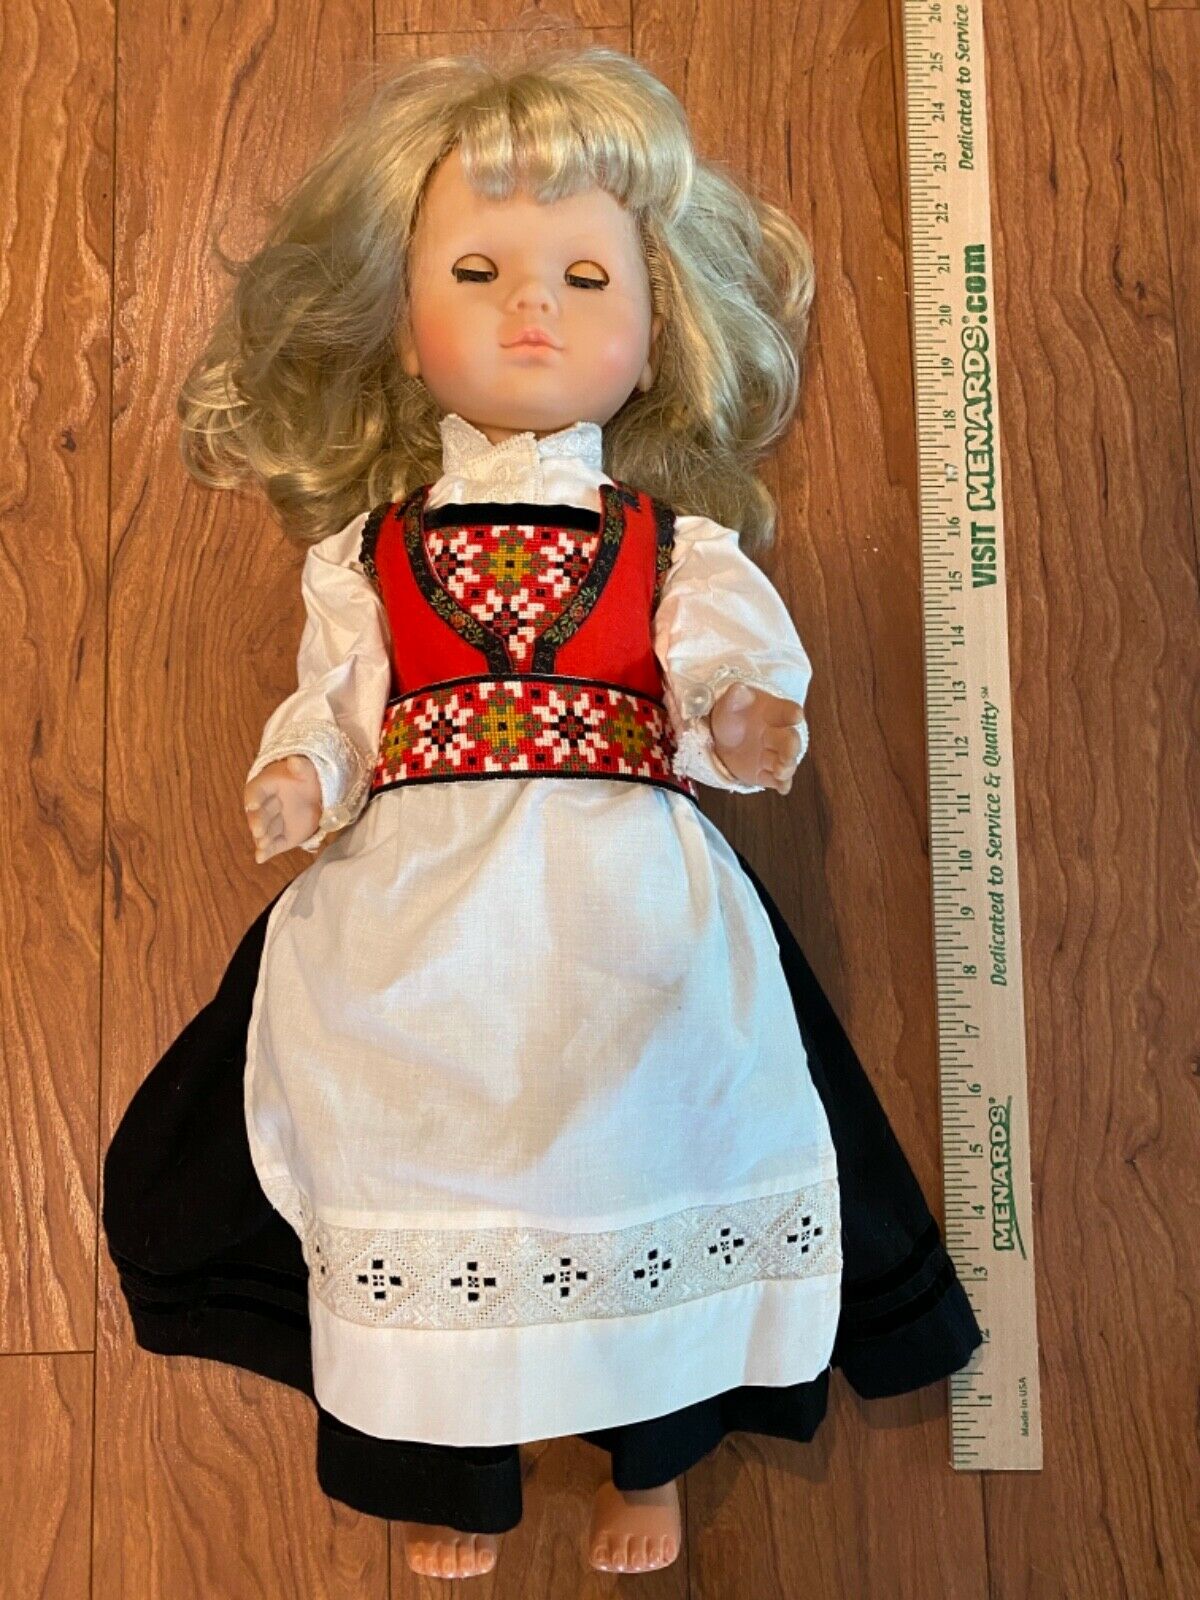 Very Pretty Max Zapf Doll Scandinavian Looking Doll 100% To Charity